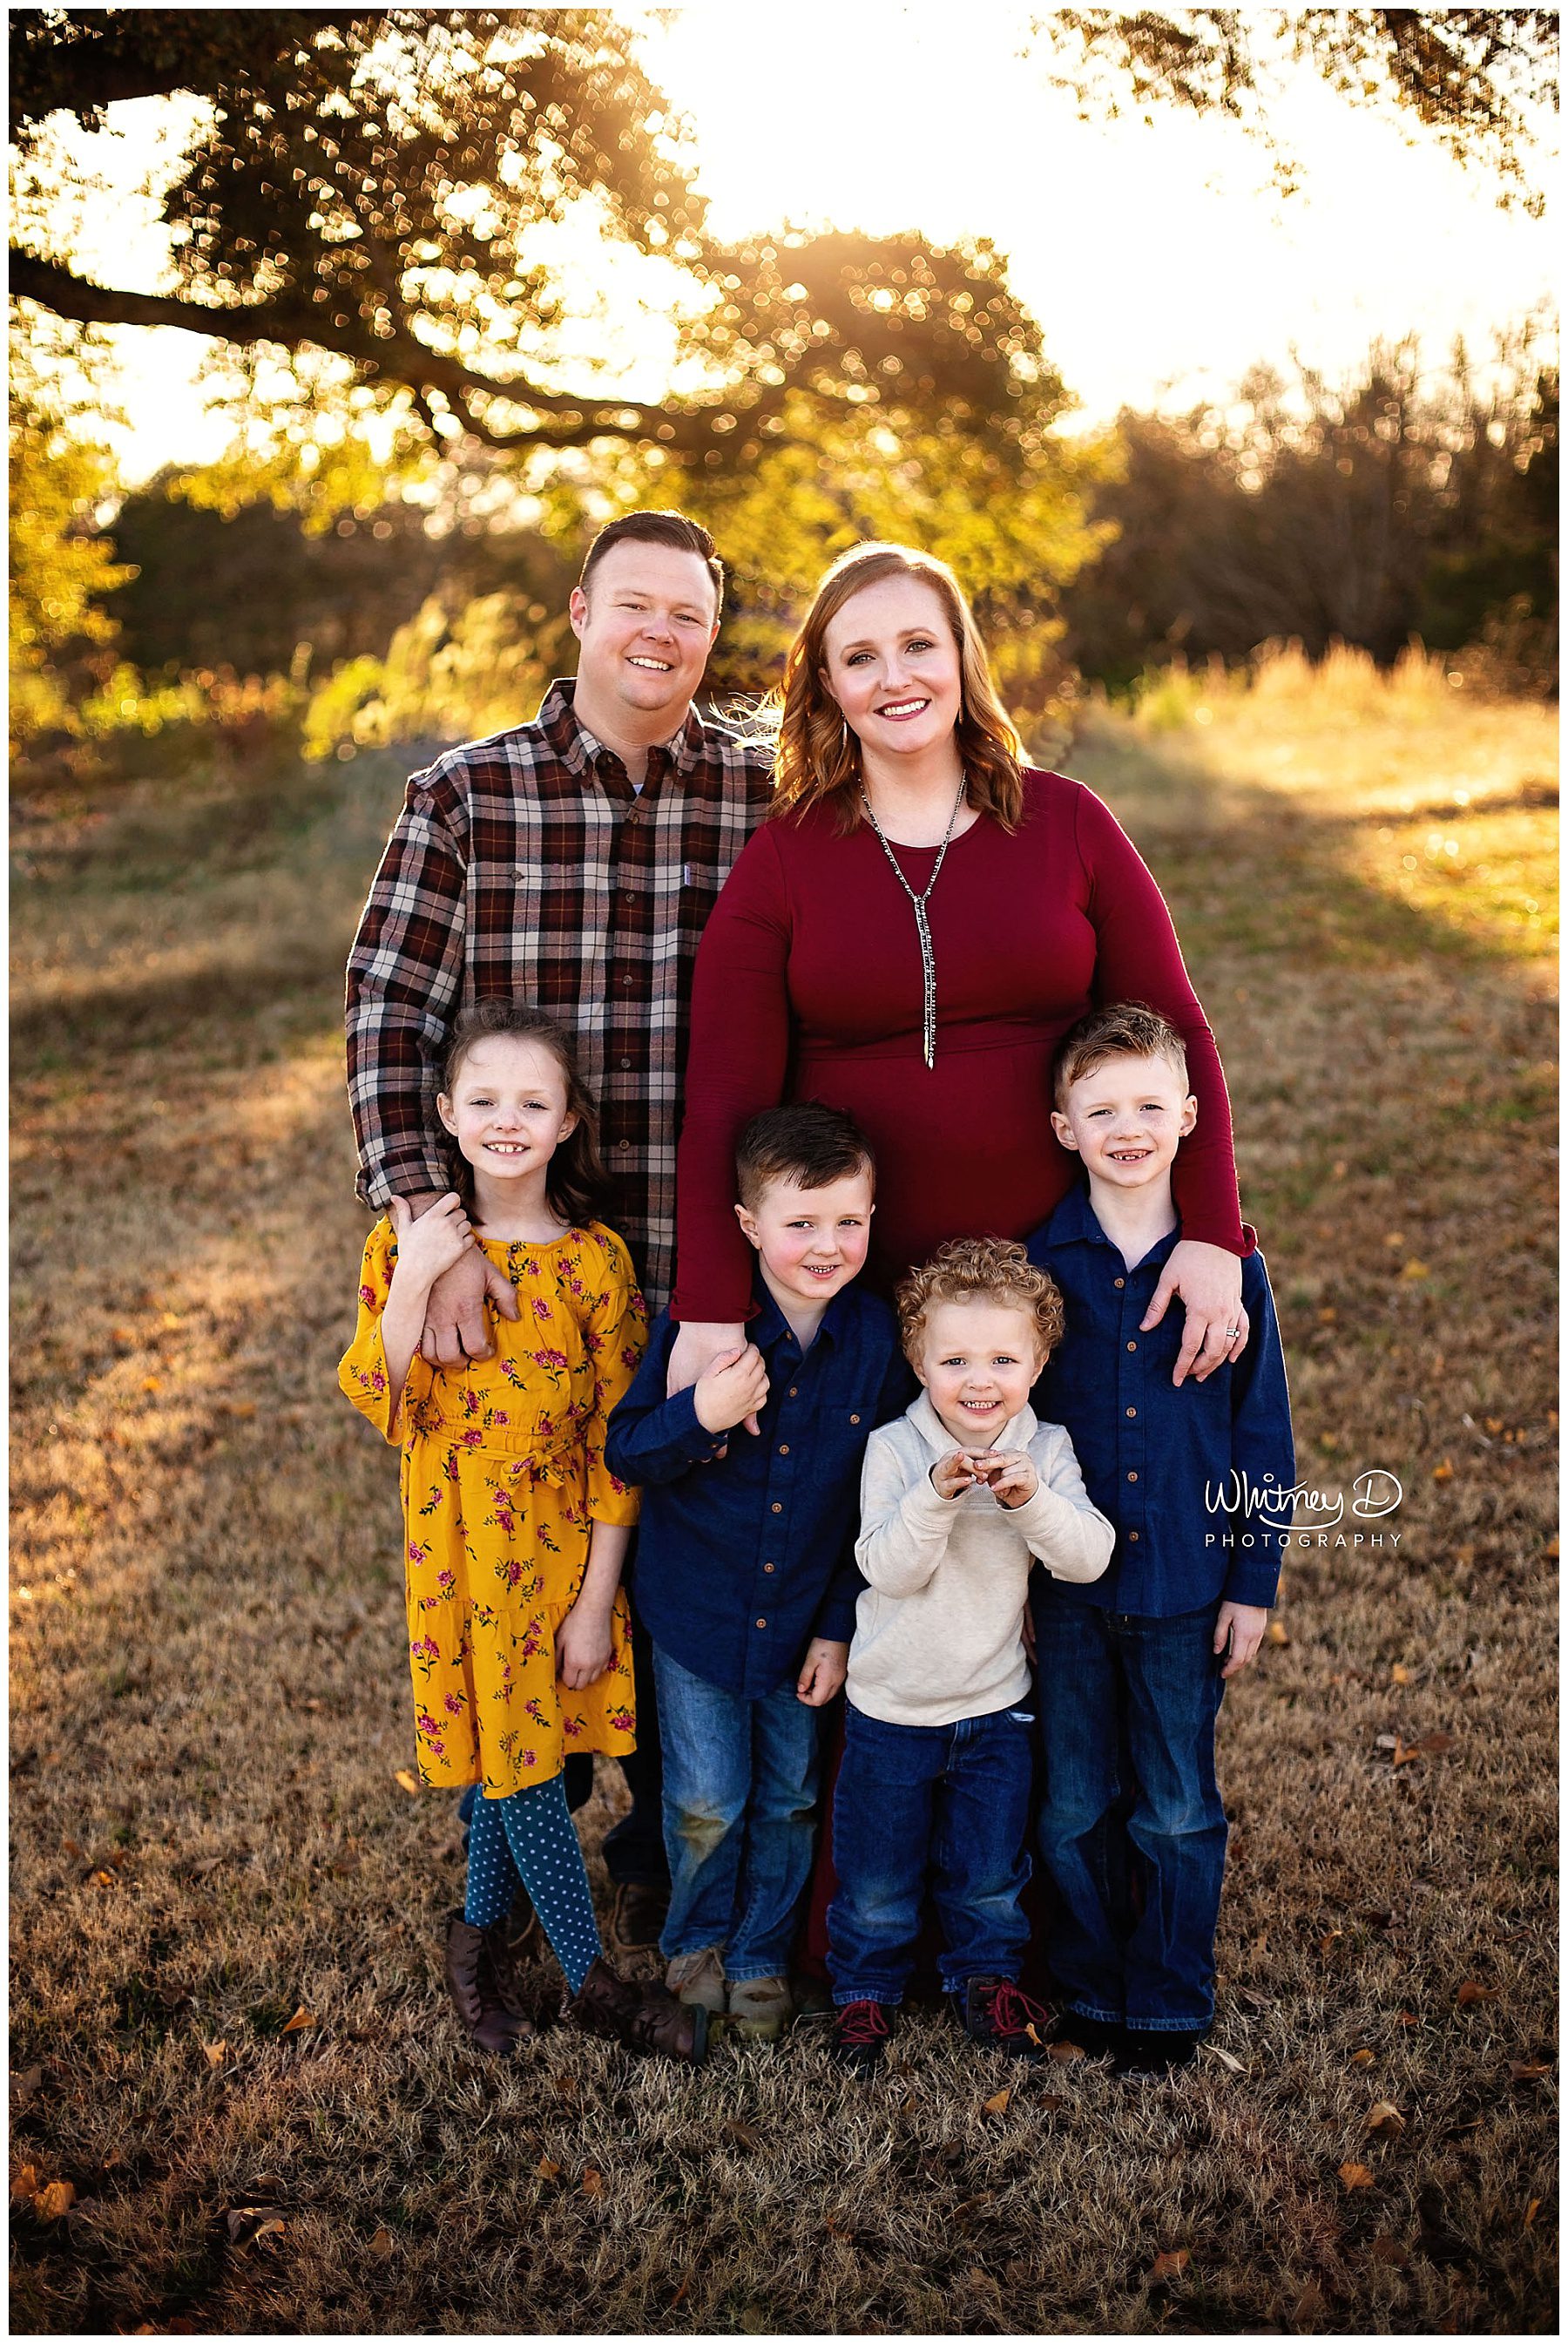 Family of six fall family photo with Whitney D. Photography in Central Arkansas